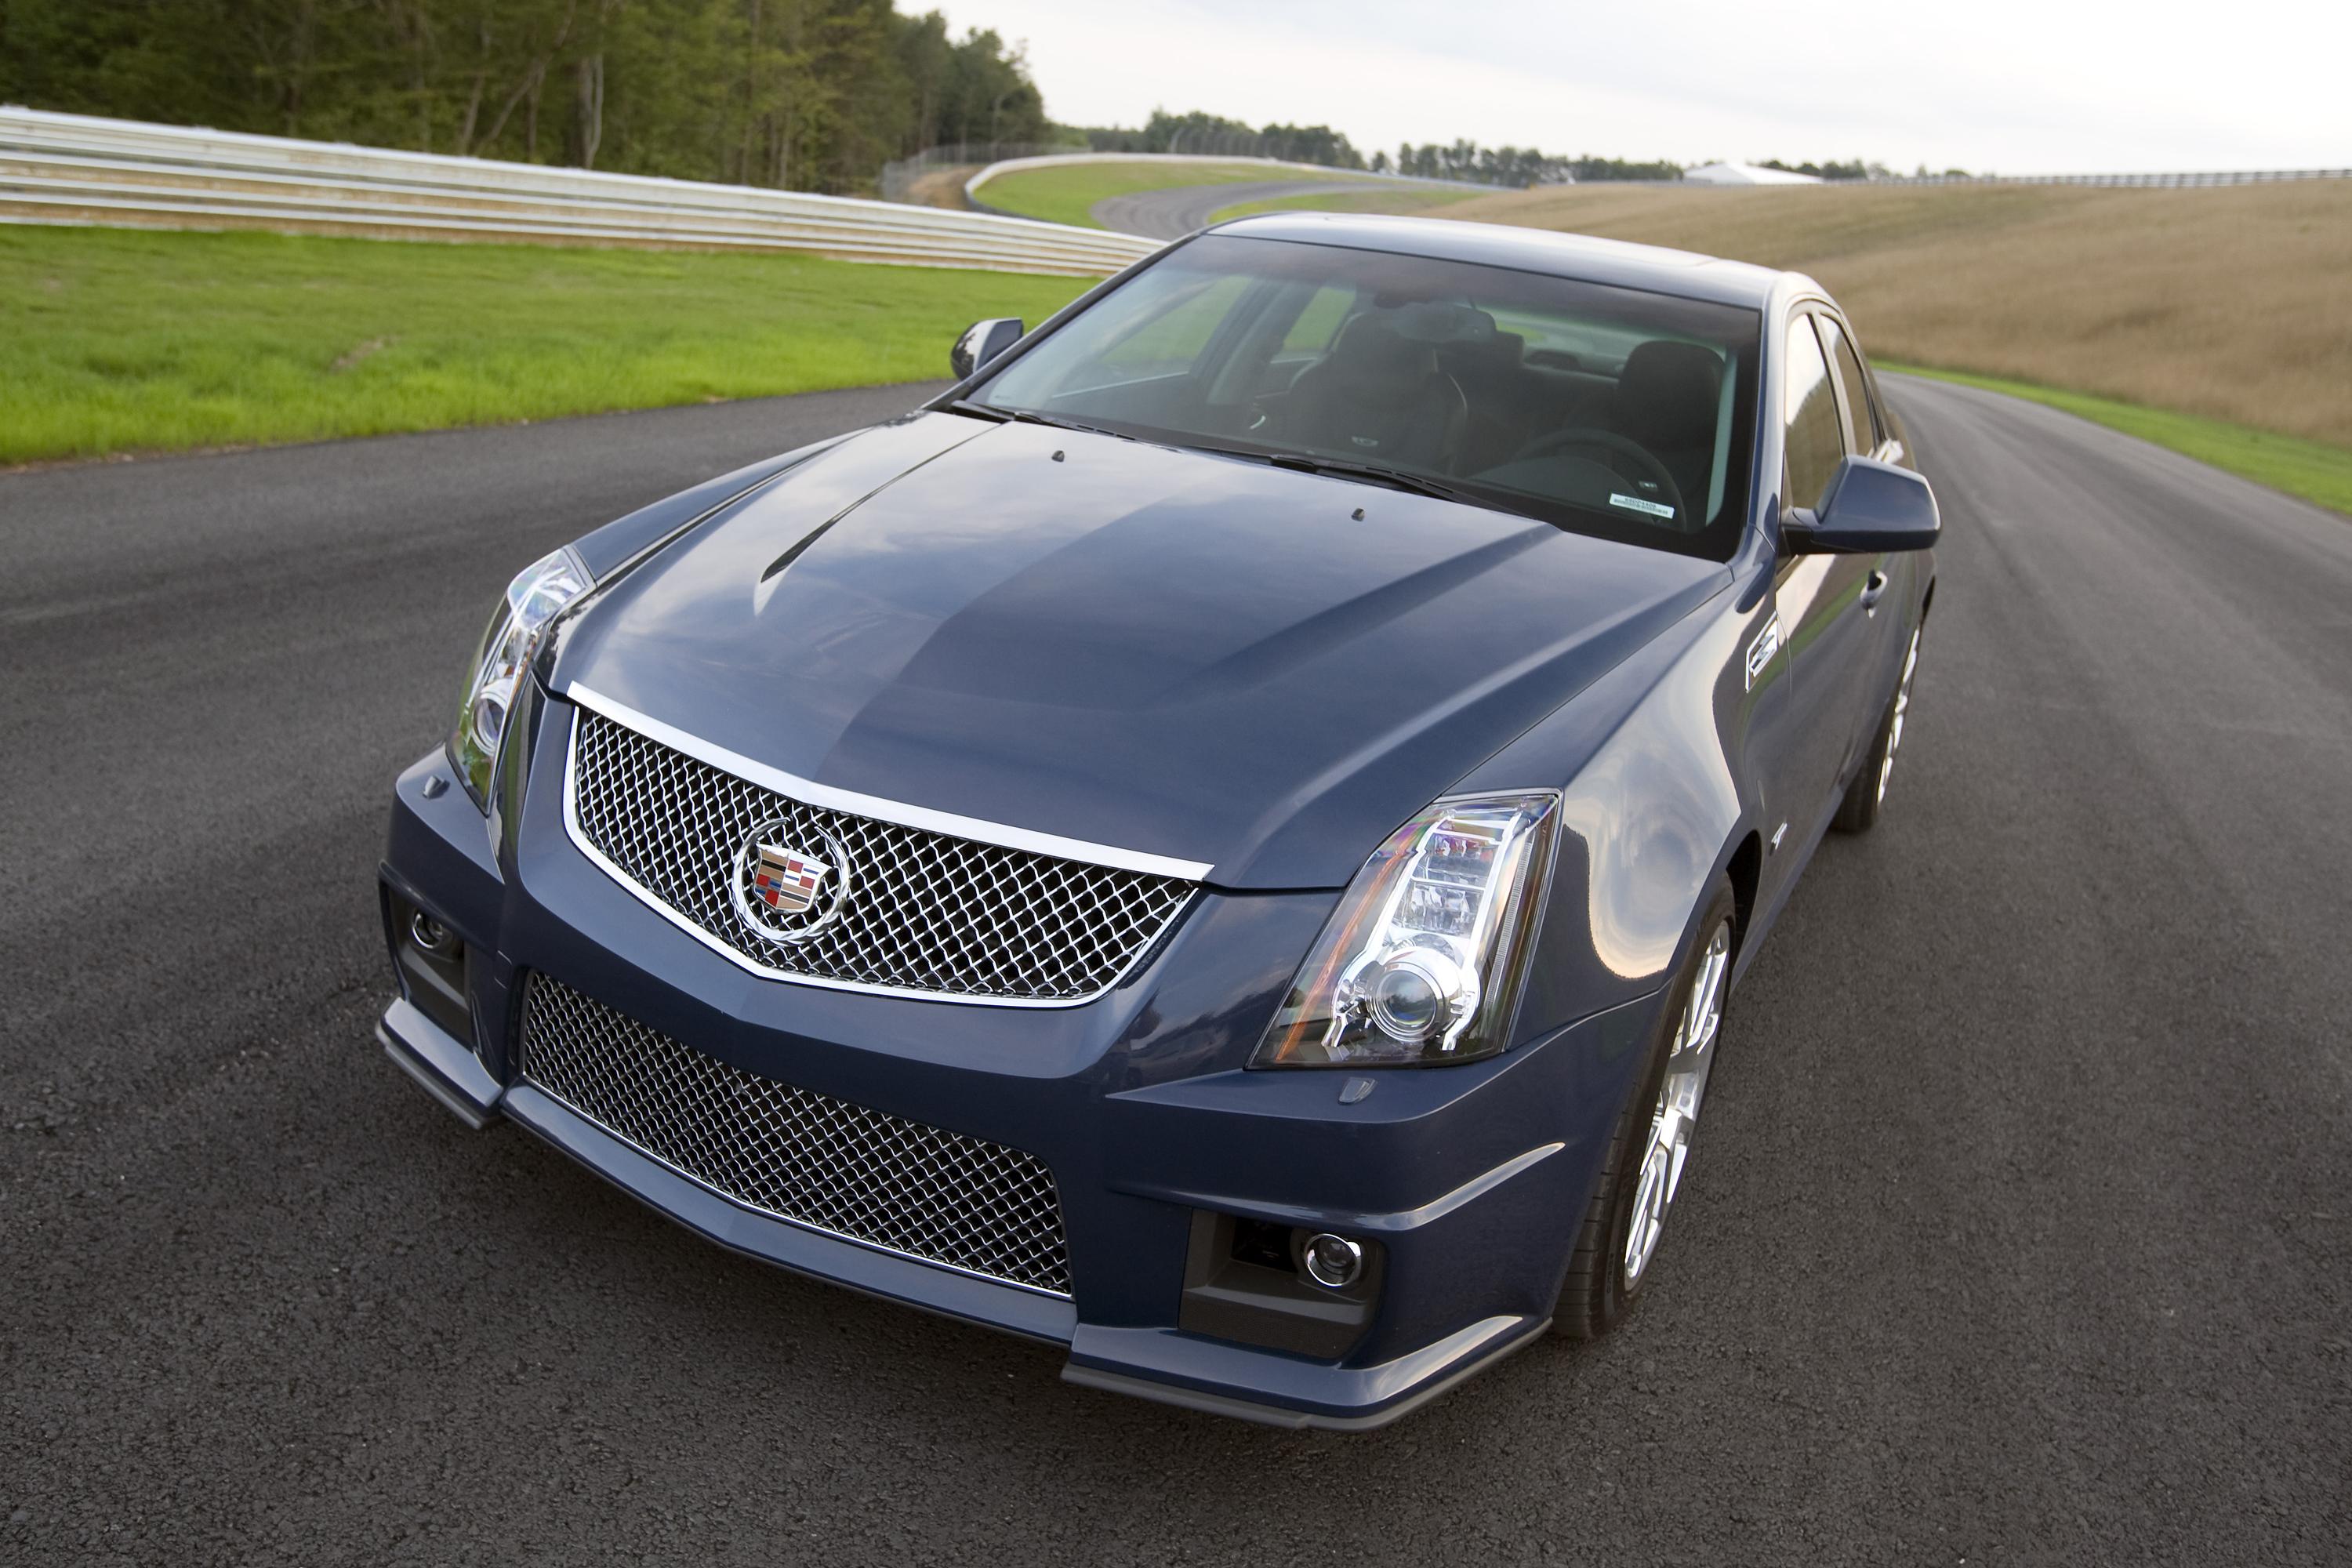 Cadillac's All-New 2009 CTS-V Ready For Launch